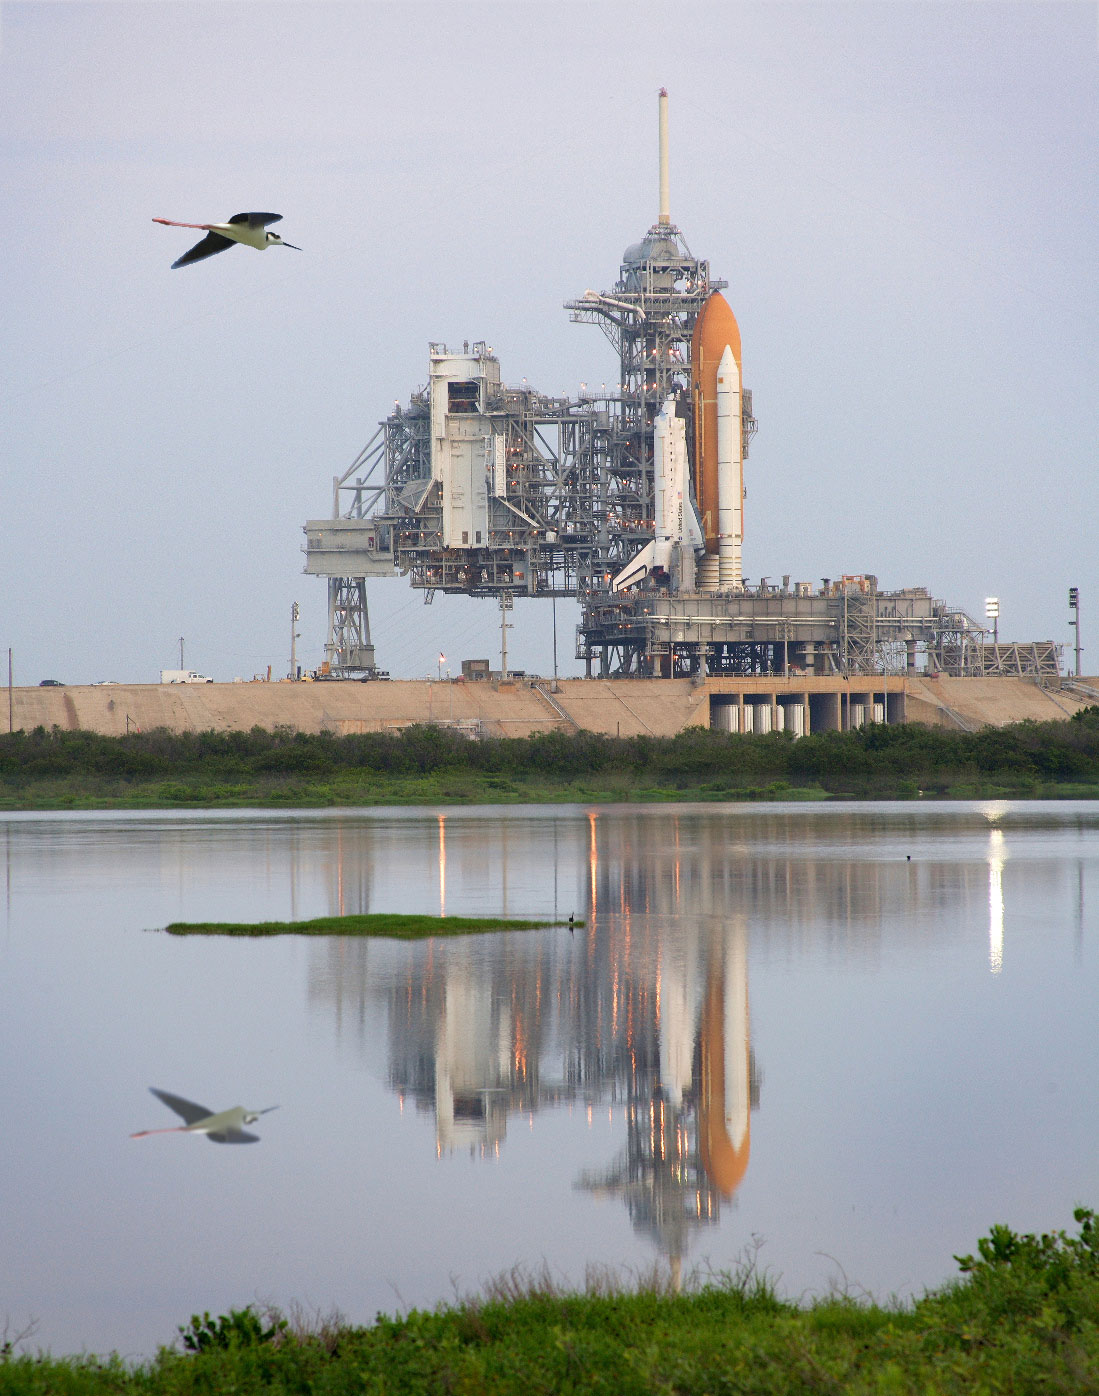 Launch of the STS-114 Discovery in 2005.